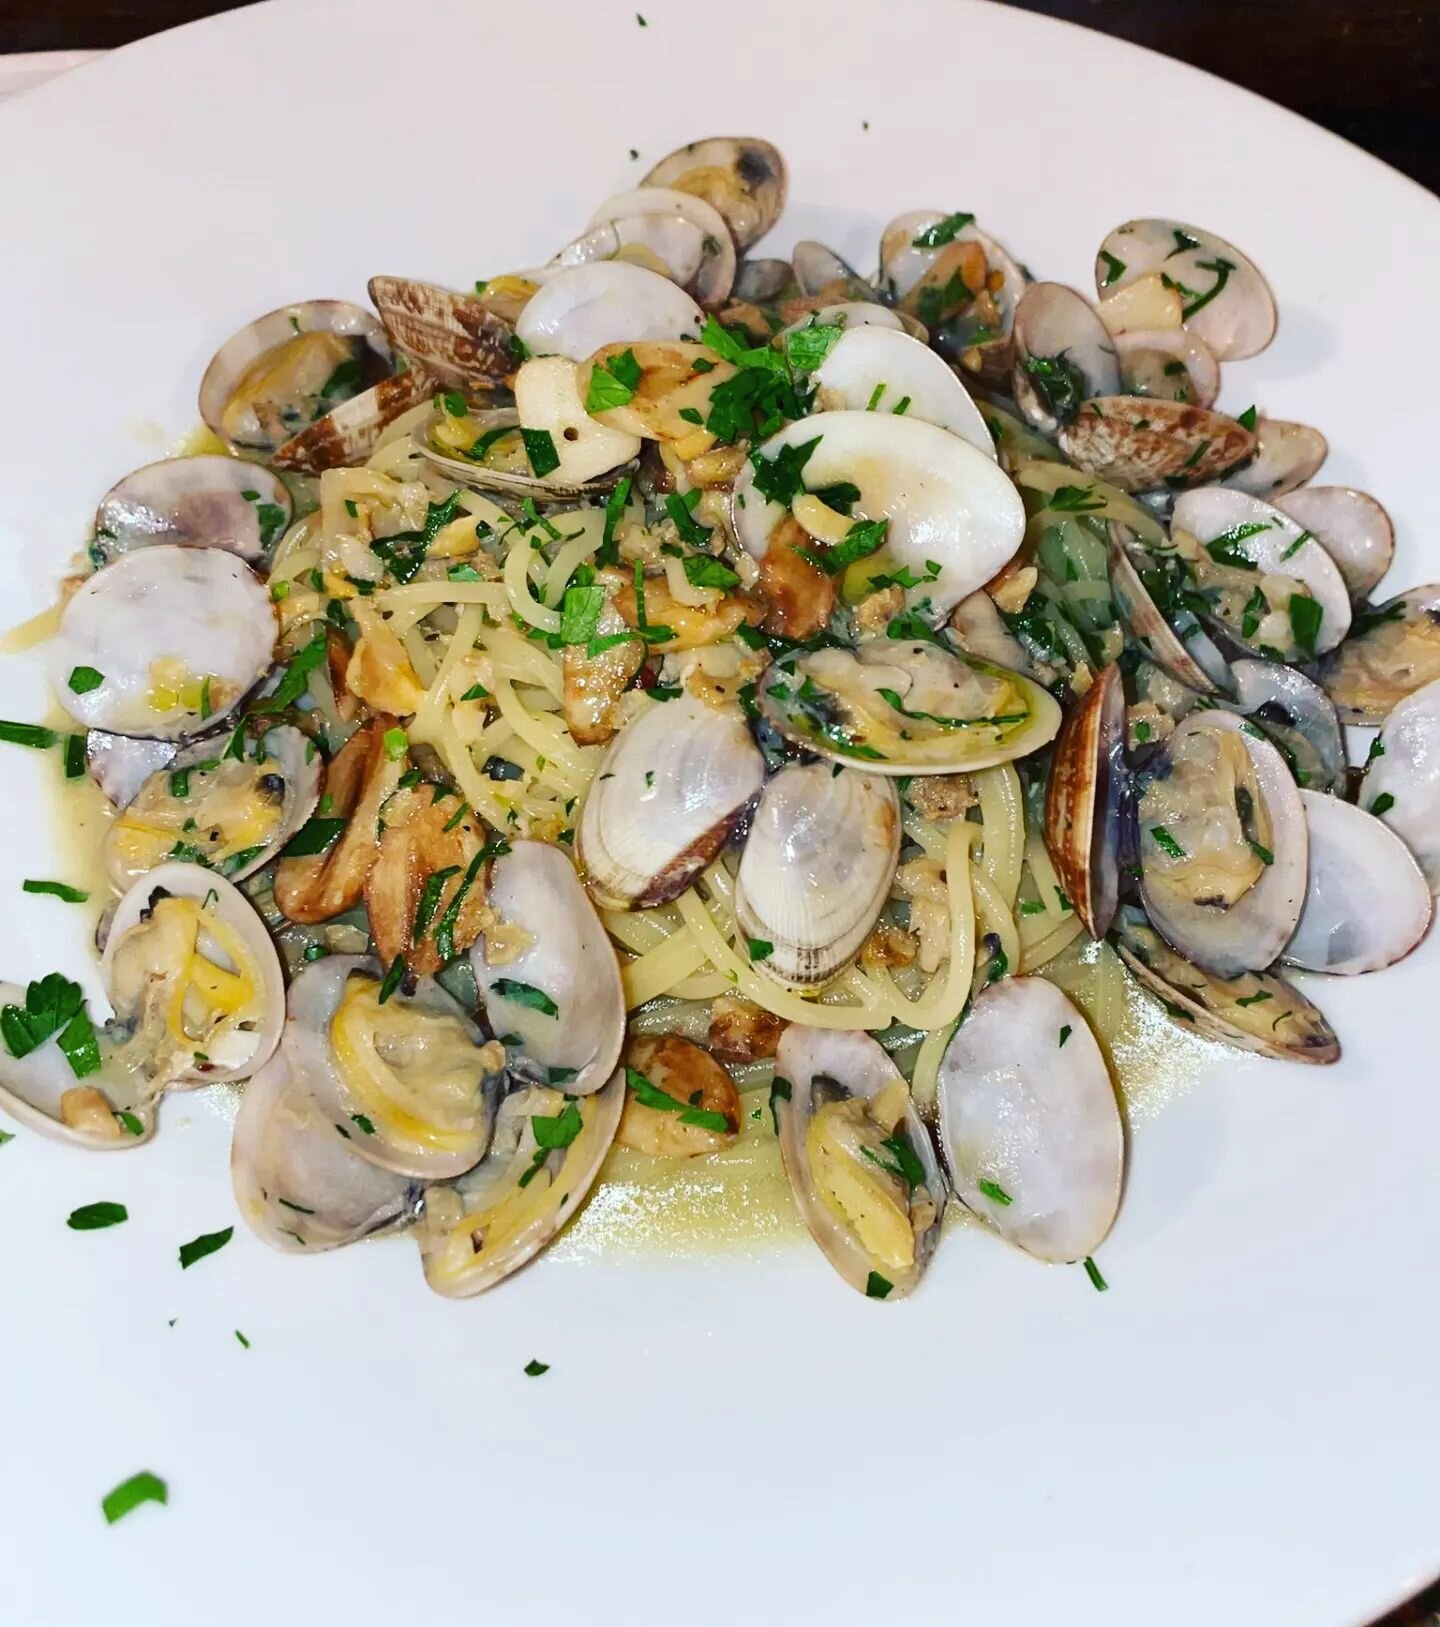 How about this spaghetti with White Clams for dinner tonight??. 
For reservations 718-448-8466,  email vinumnyc@gmail.com or @opentable